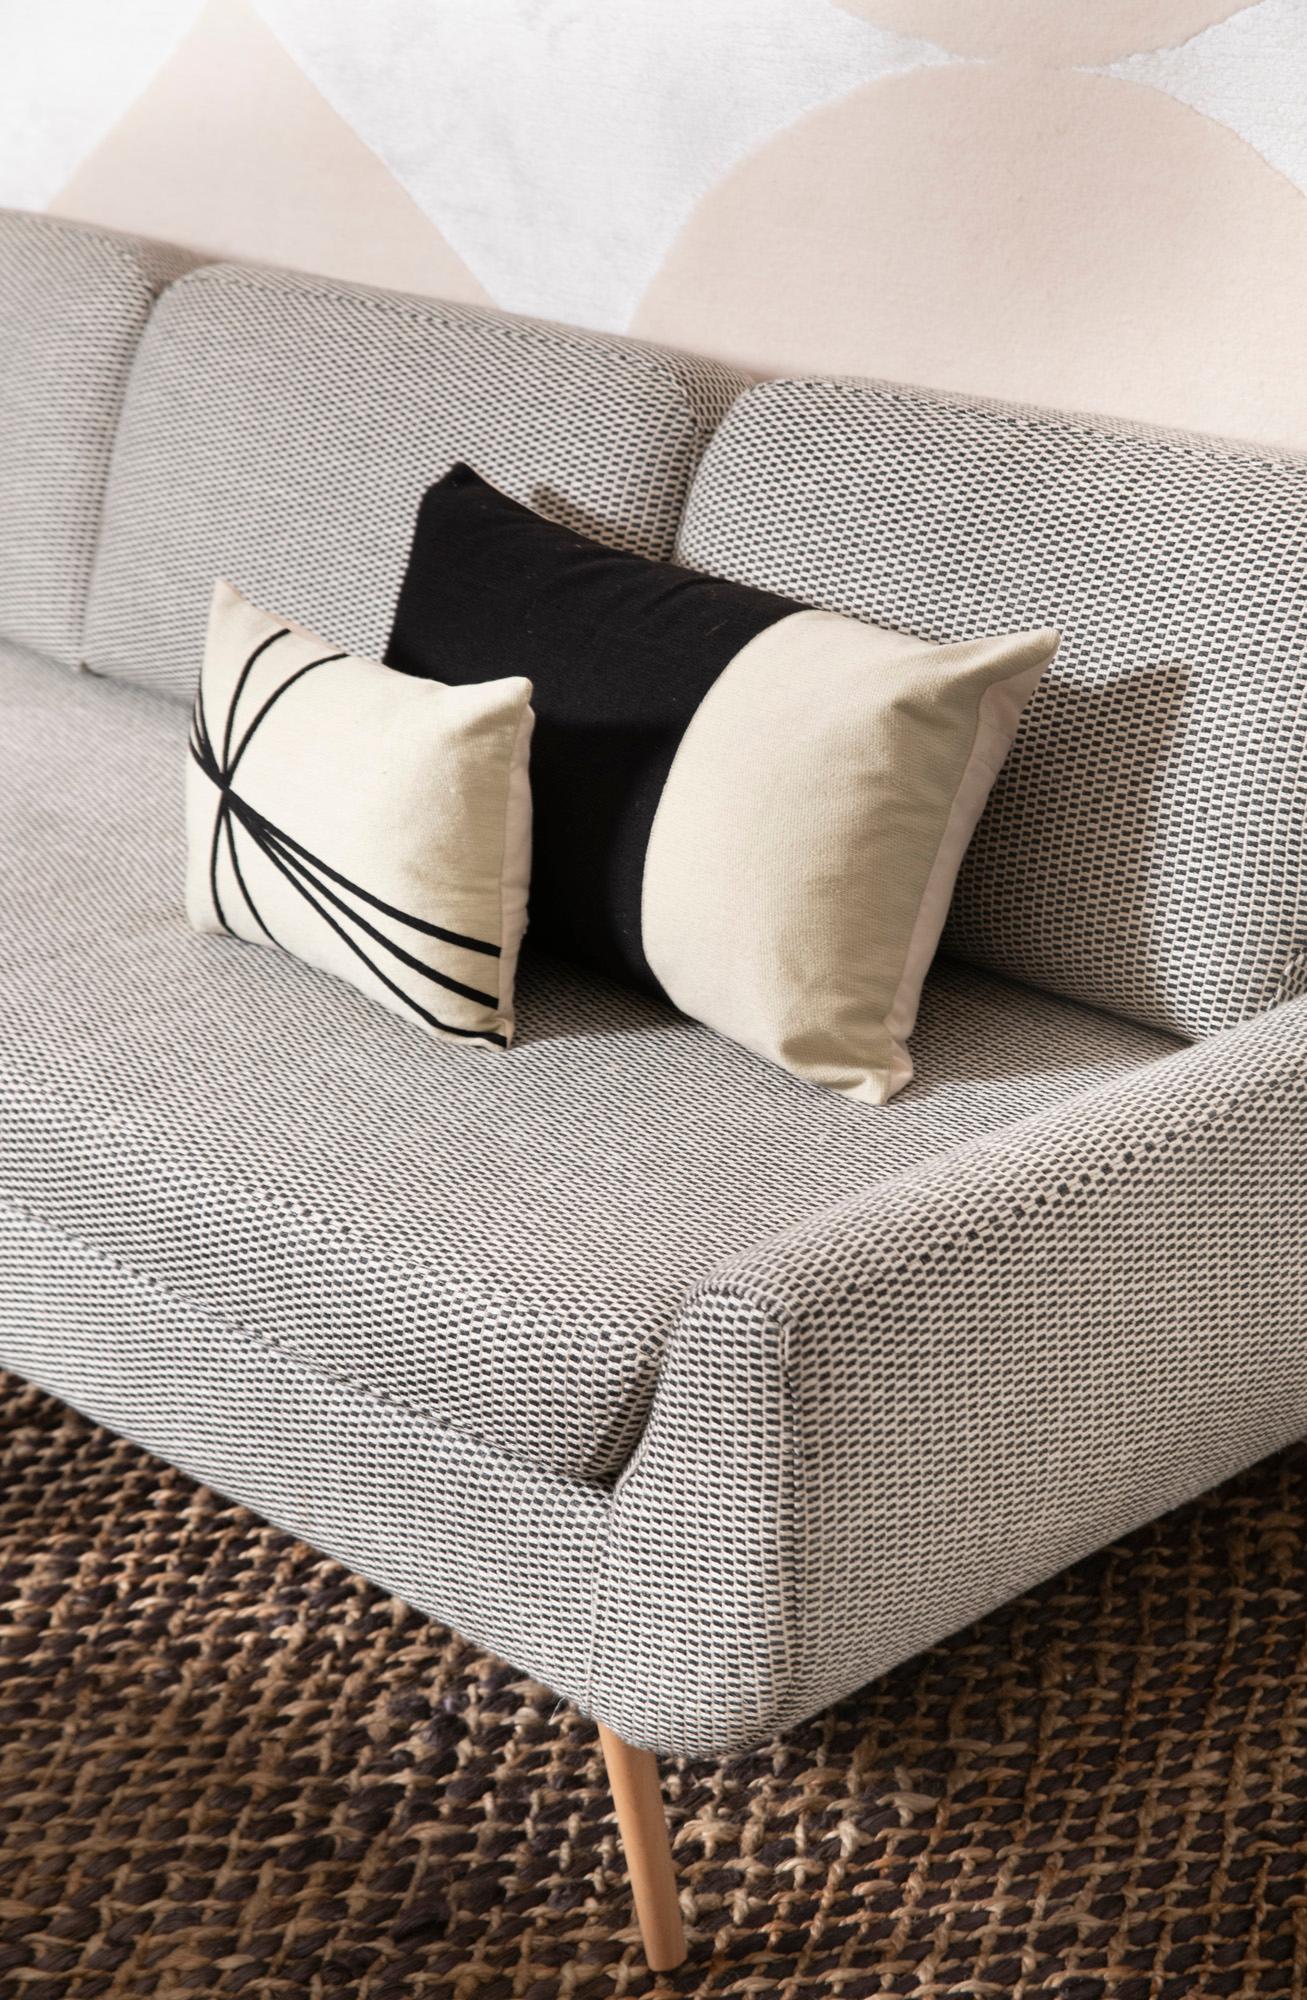 Contemporary Modern Kilombo Home Embroidery Pillow Archi Beige & Black